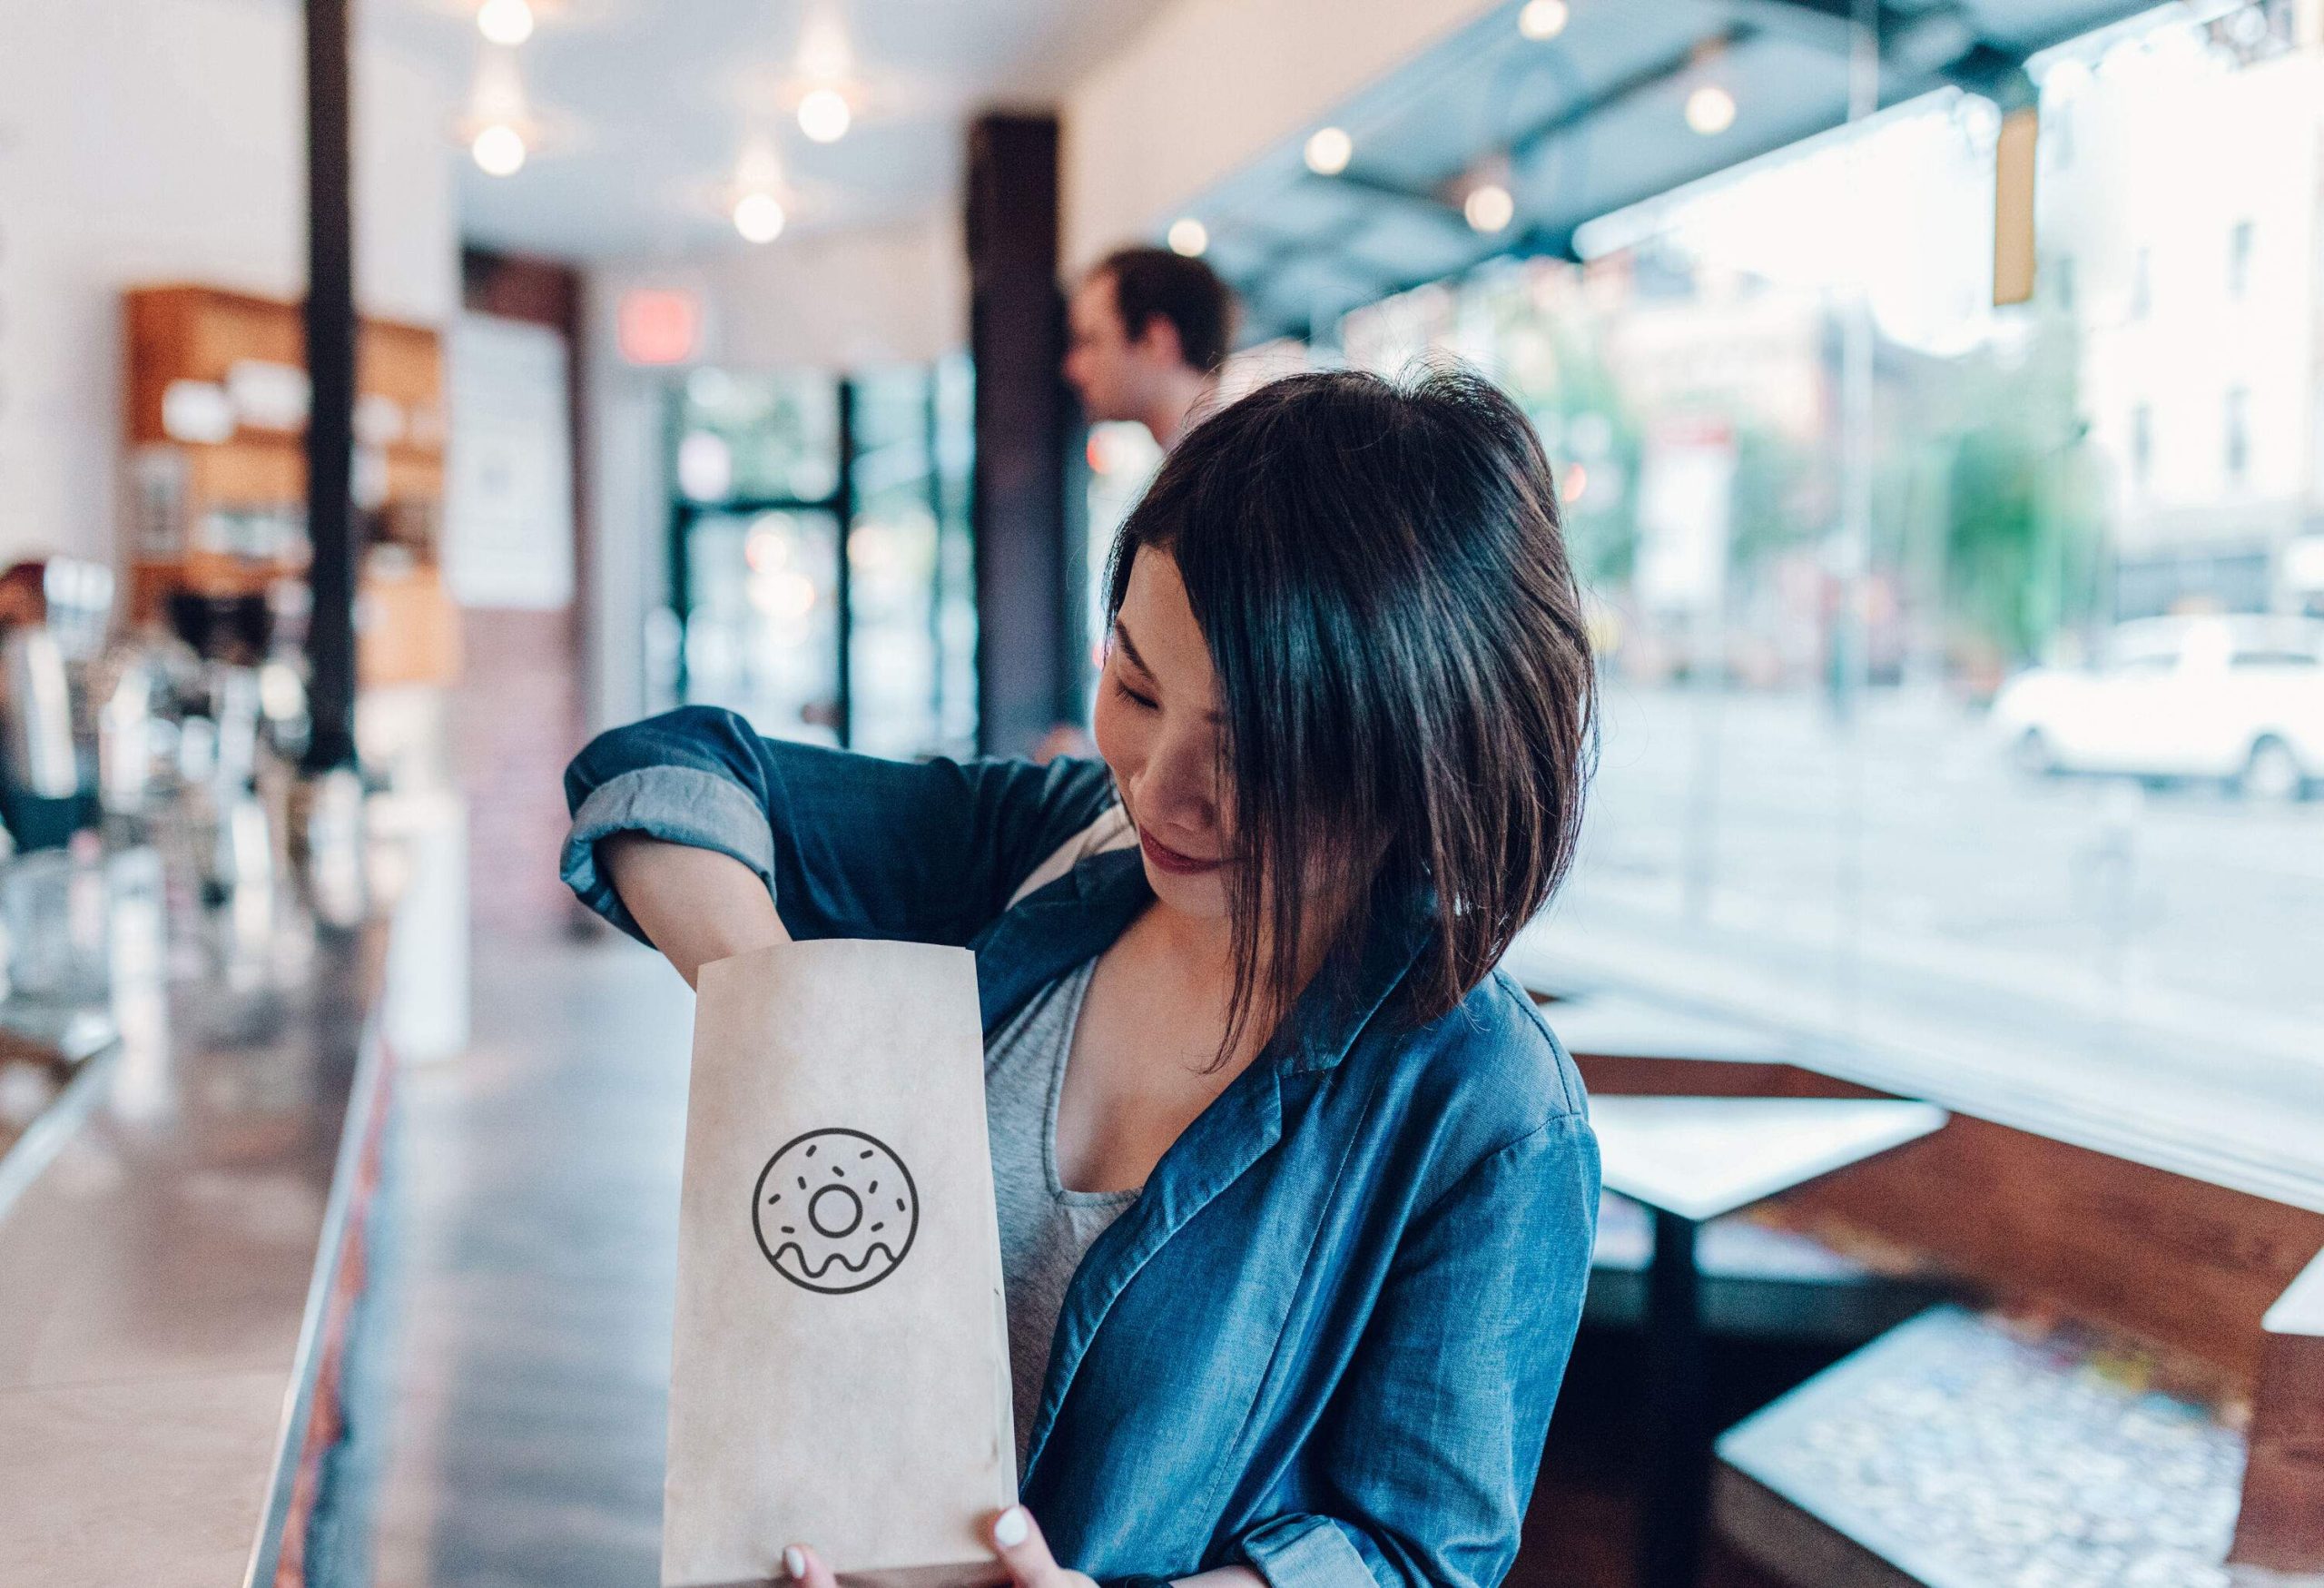 A young woman delving into a brown paper bag with an outline of a doughnut on it.